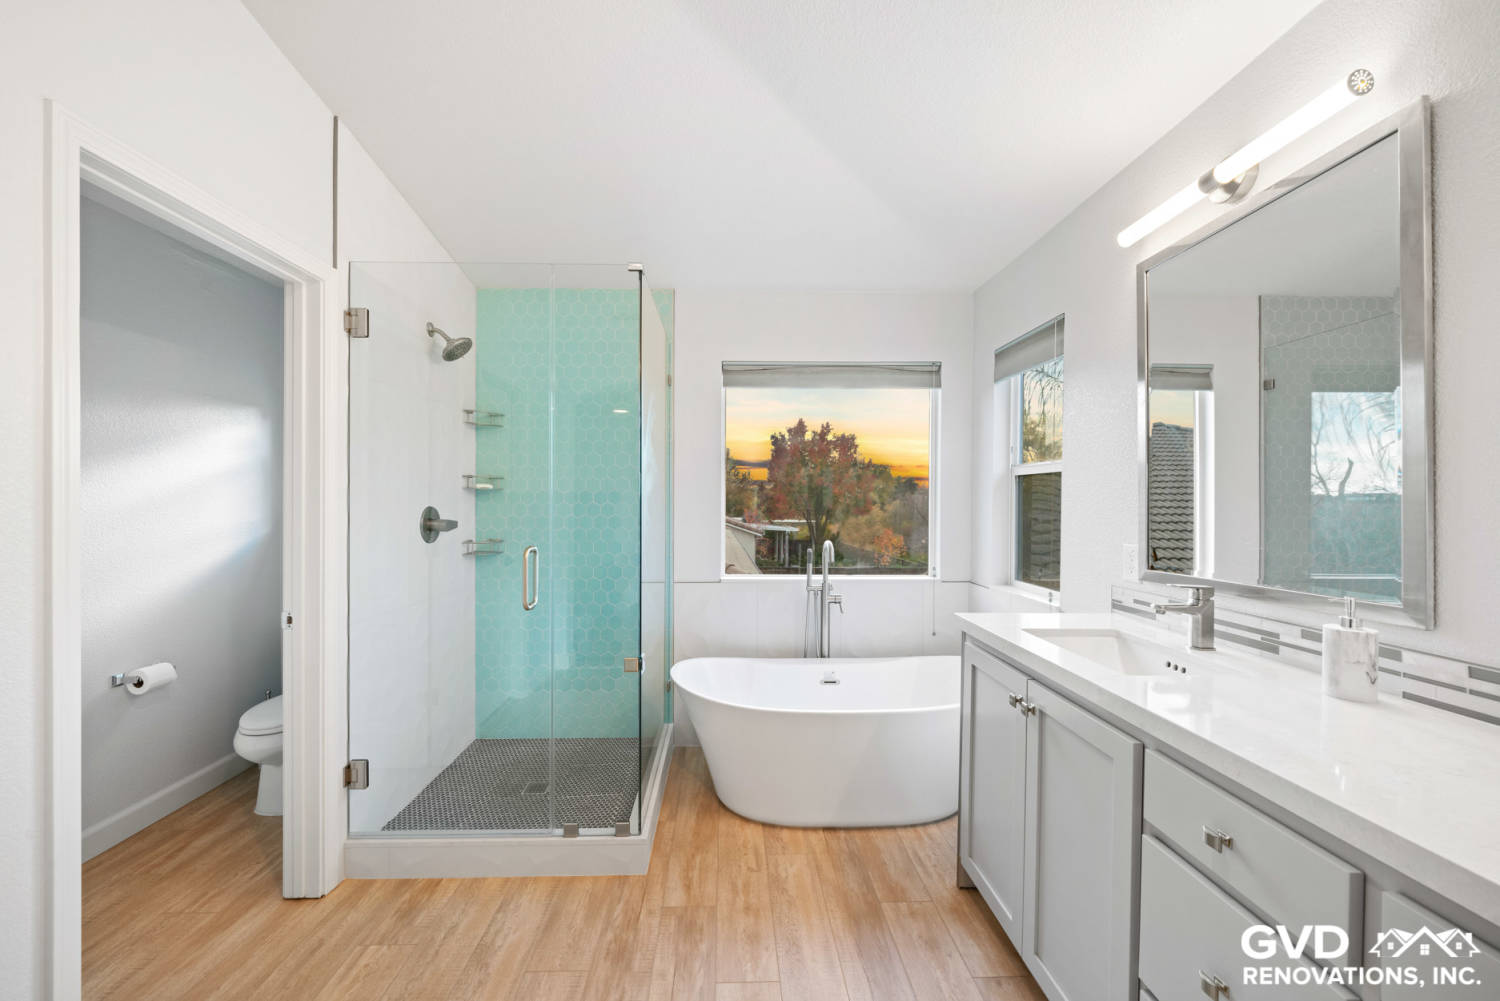 Fascinating bathroom redos photos How Much Is The Average Cost Of A Bathroom Remodel